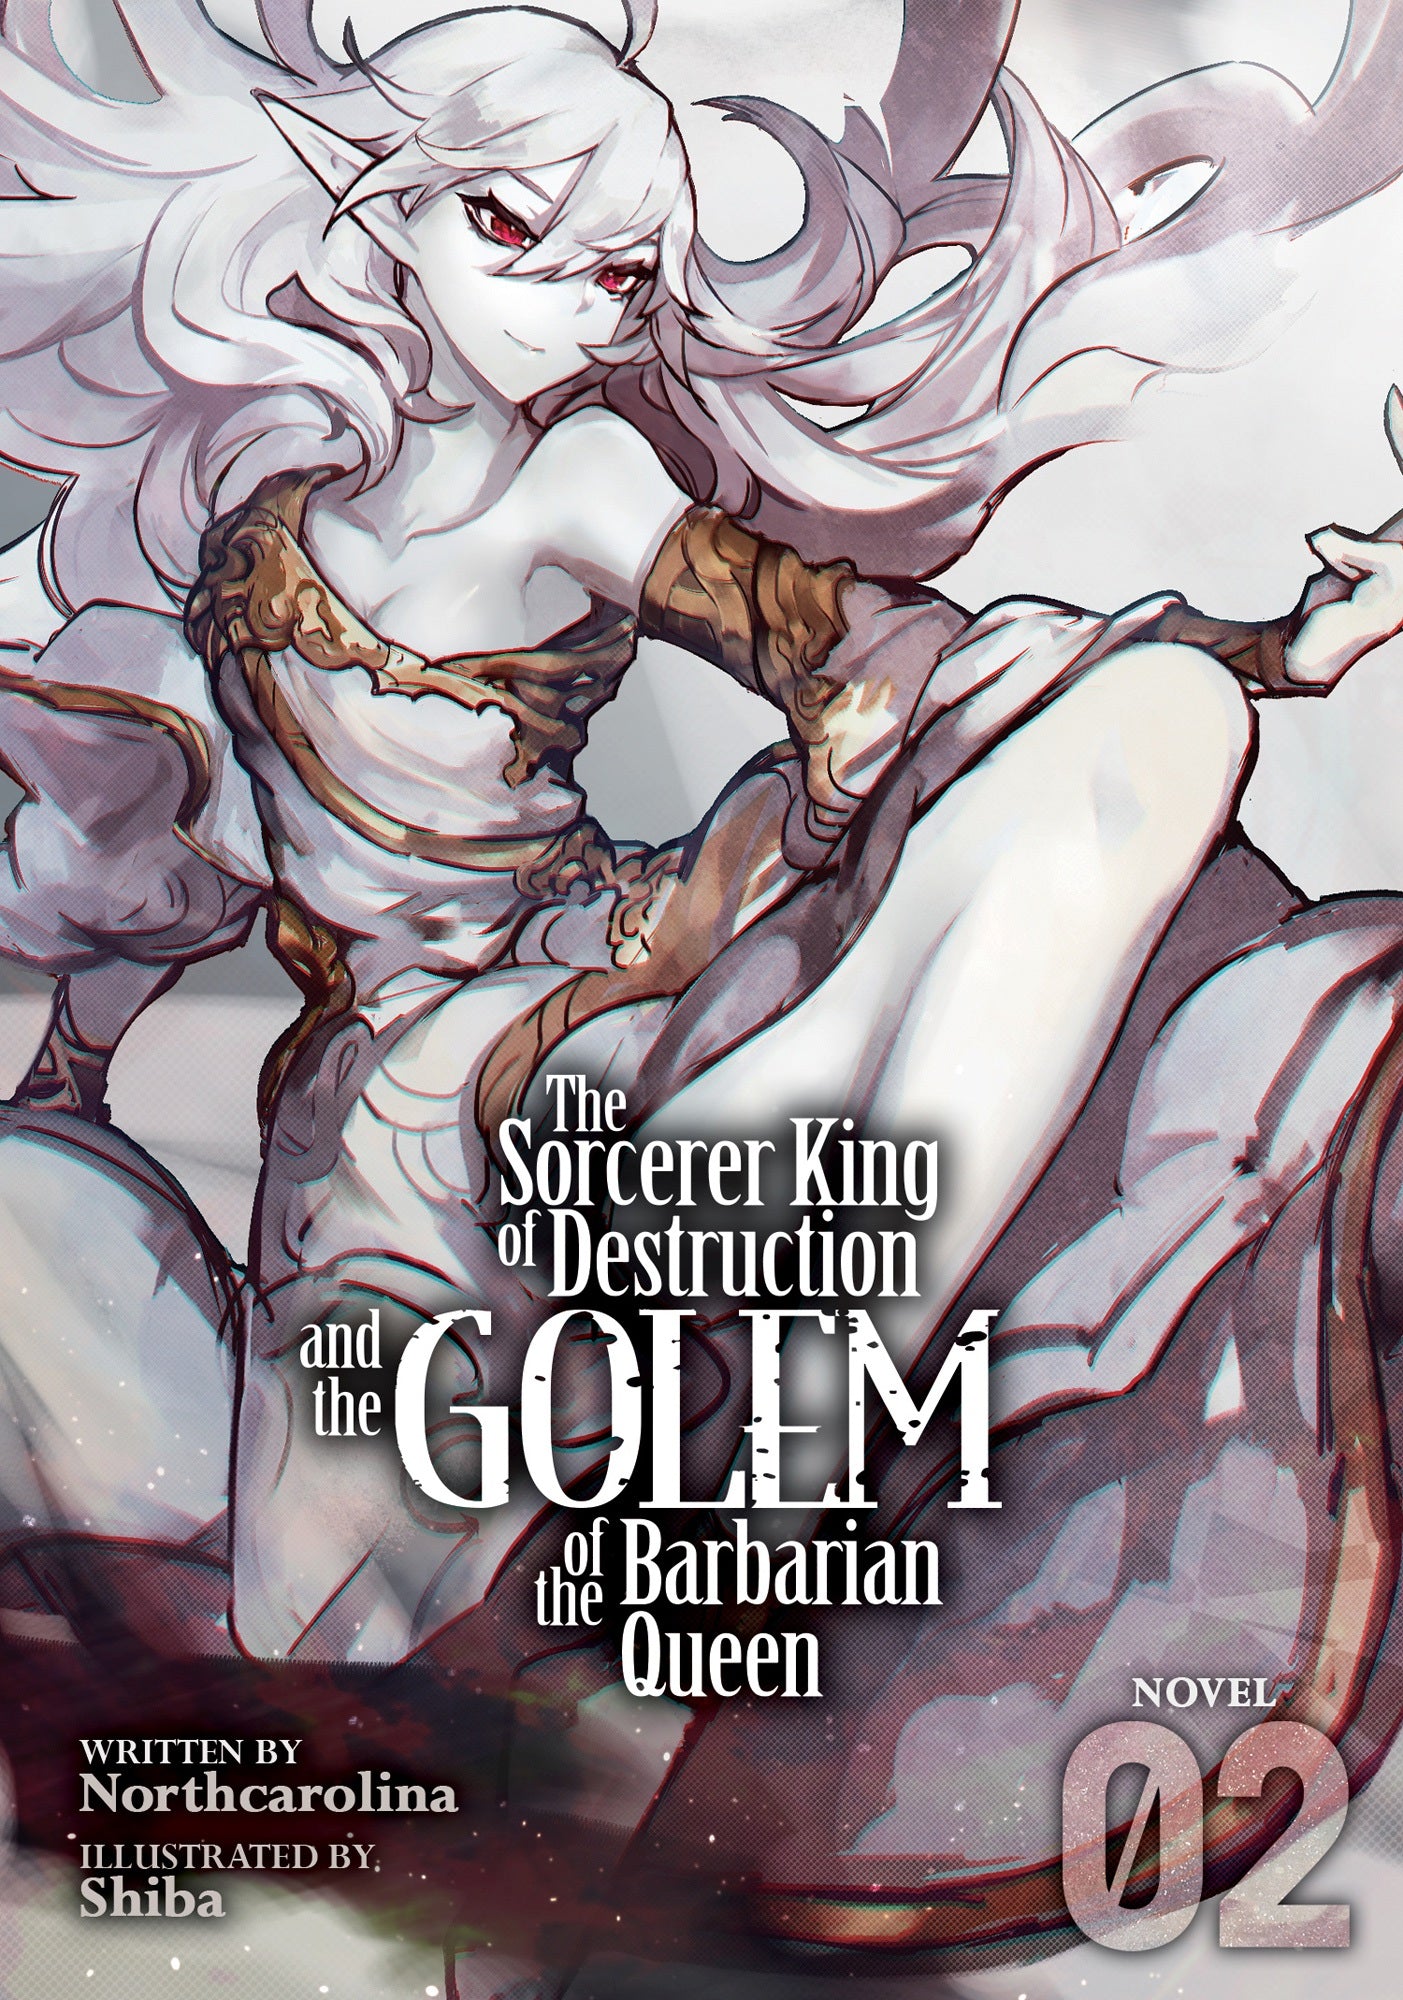 The Sorcerer King of Destruction and the Golem of the Barbarian Queen (Light Novel) Vol. 02